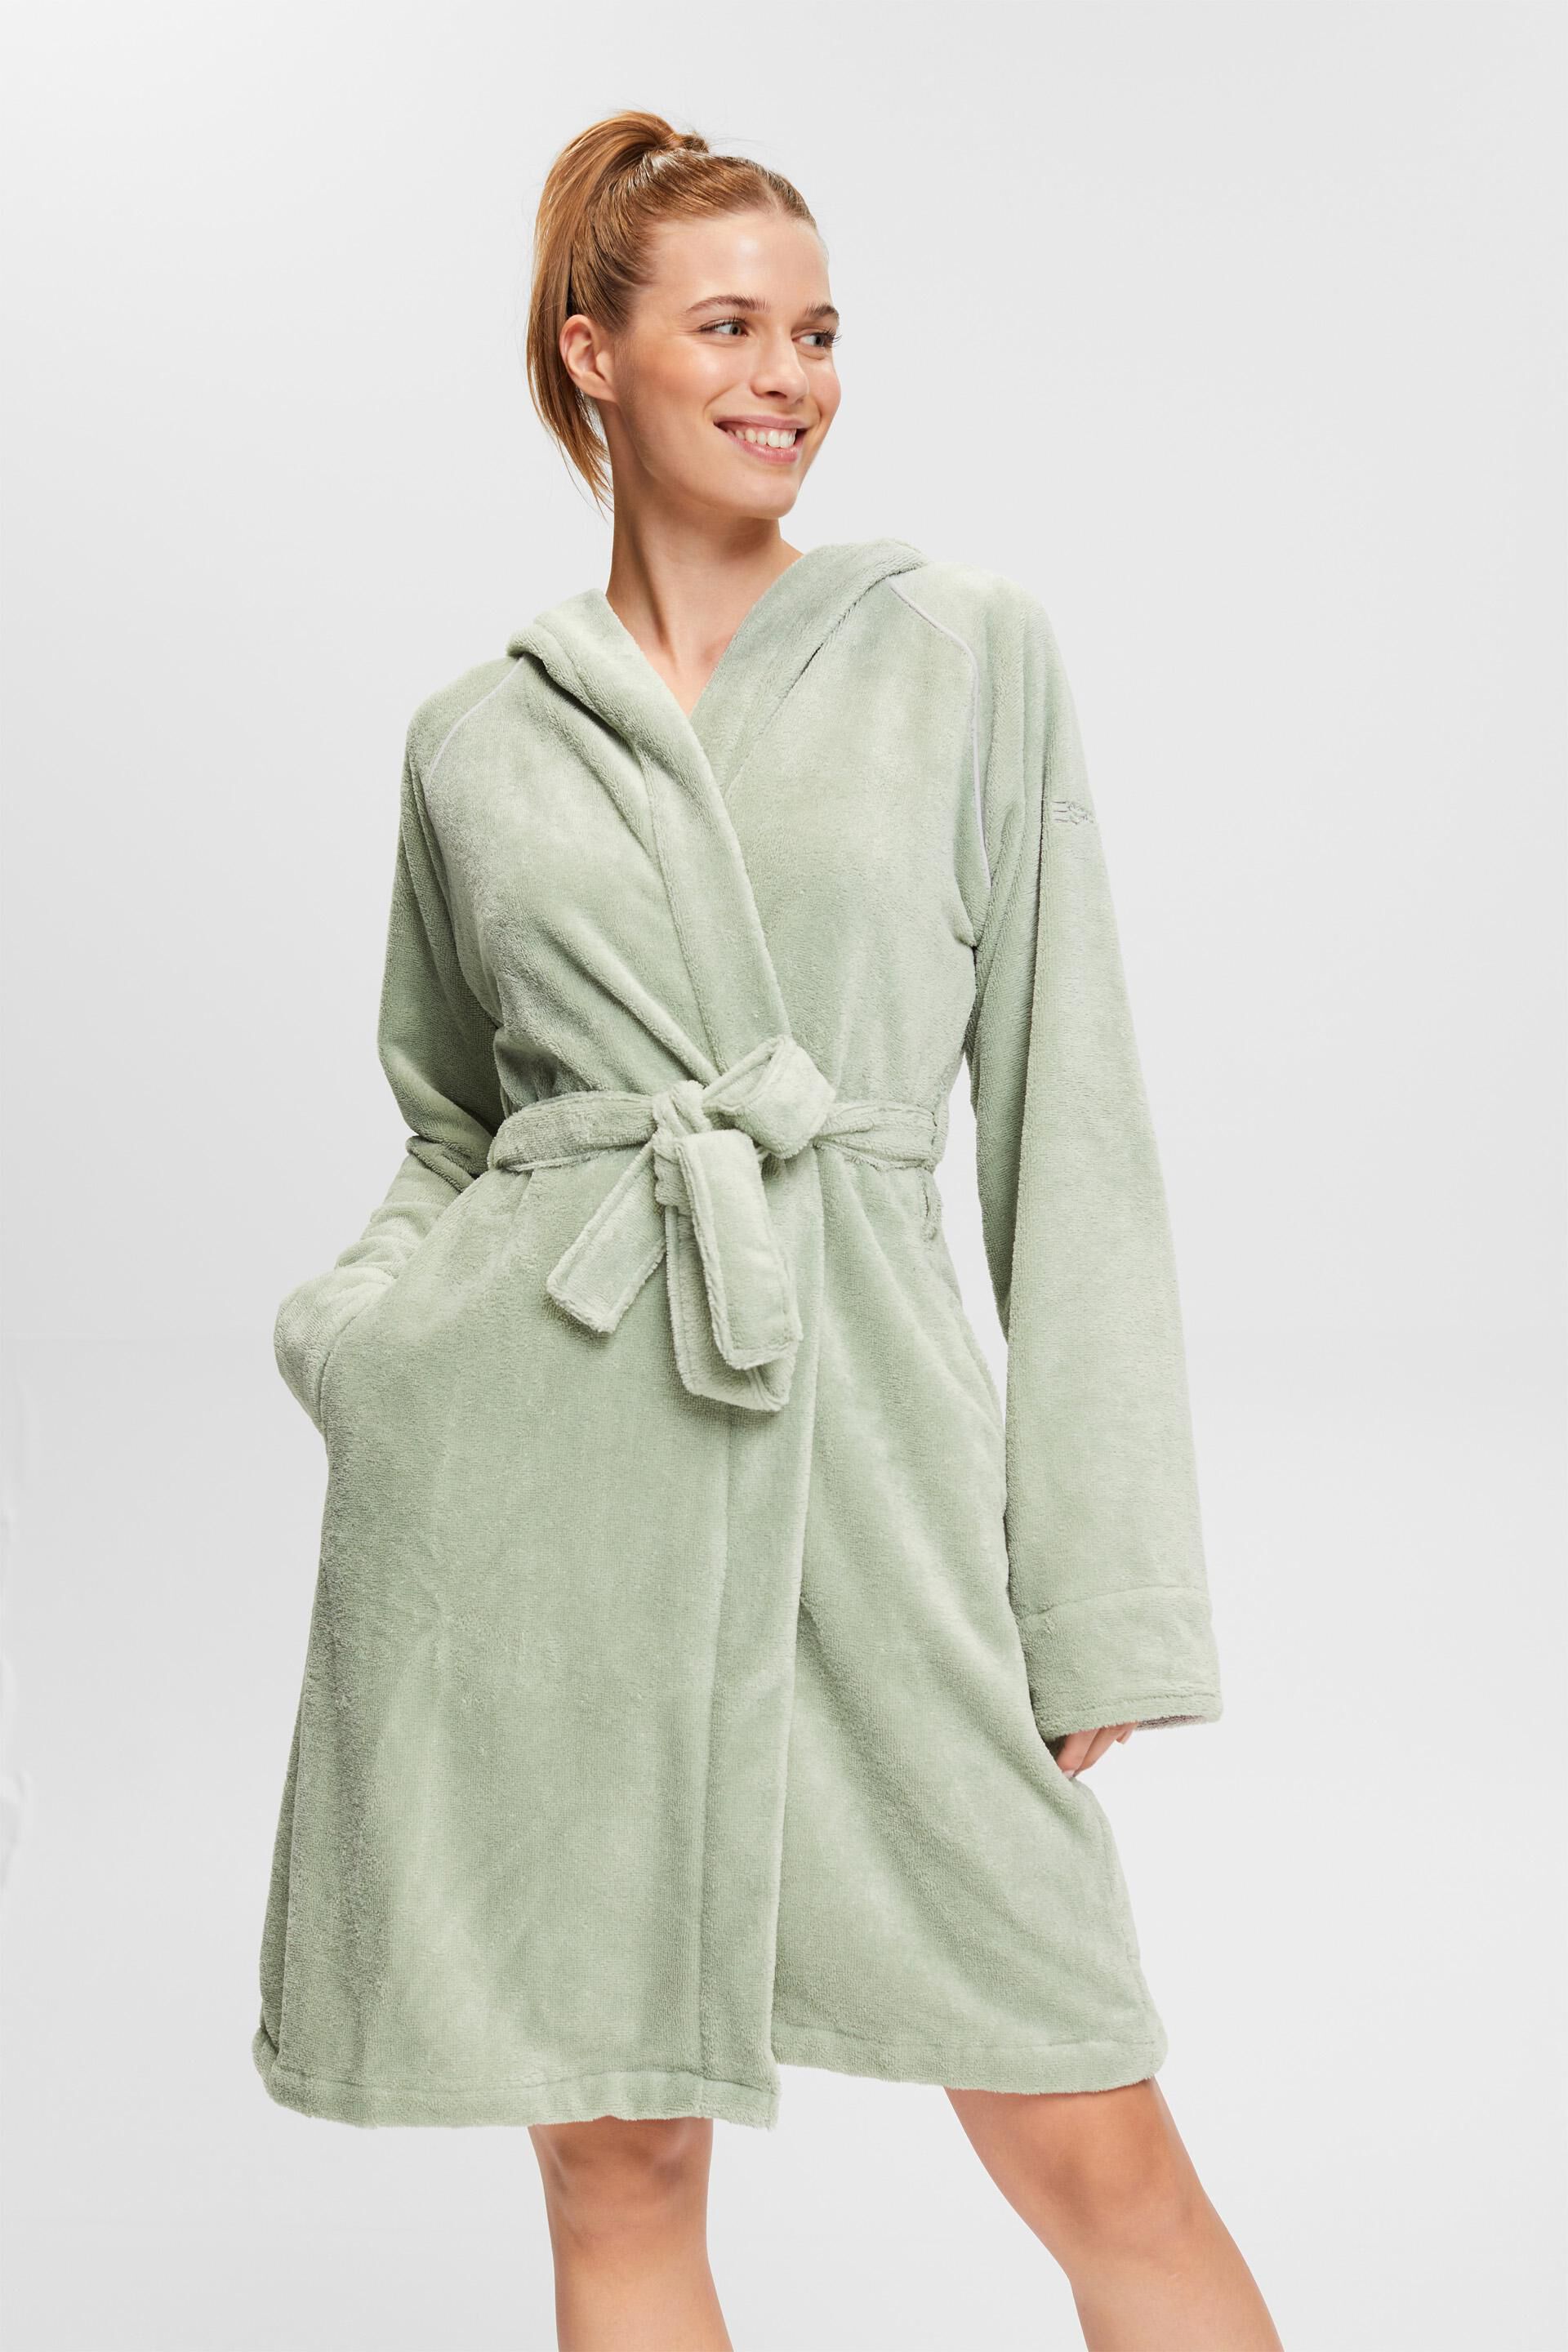 Lora Dora Womens Cotton Towelling Bath Robe Ladies Hotel Terry Dressing Gown Bathrobe Highly Absorbent Natural Women Hooded and Shawl Towel Bath Wrap 